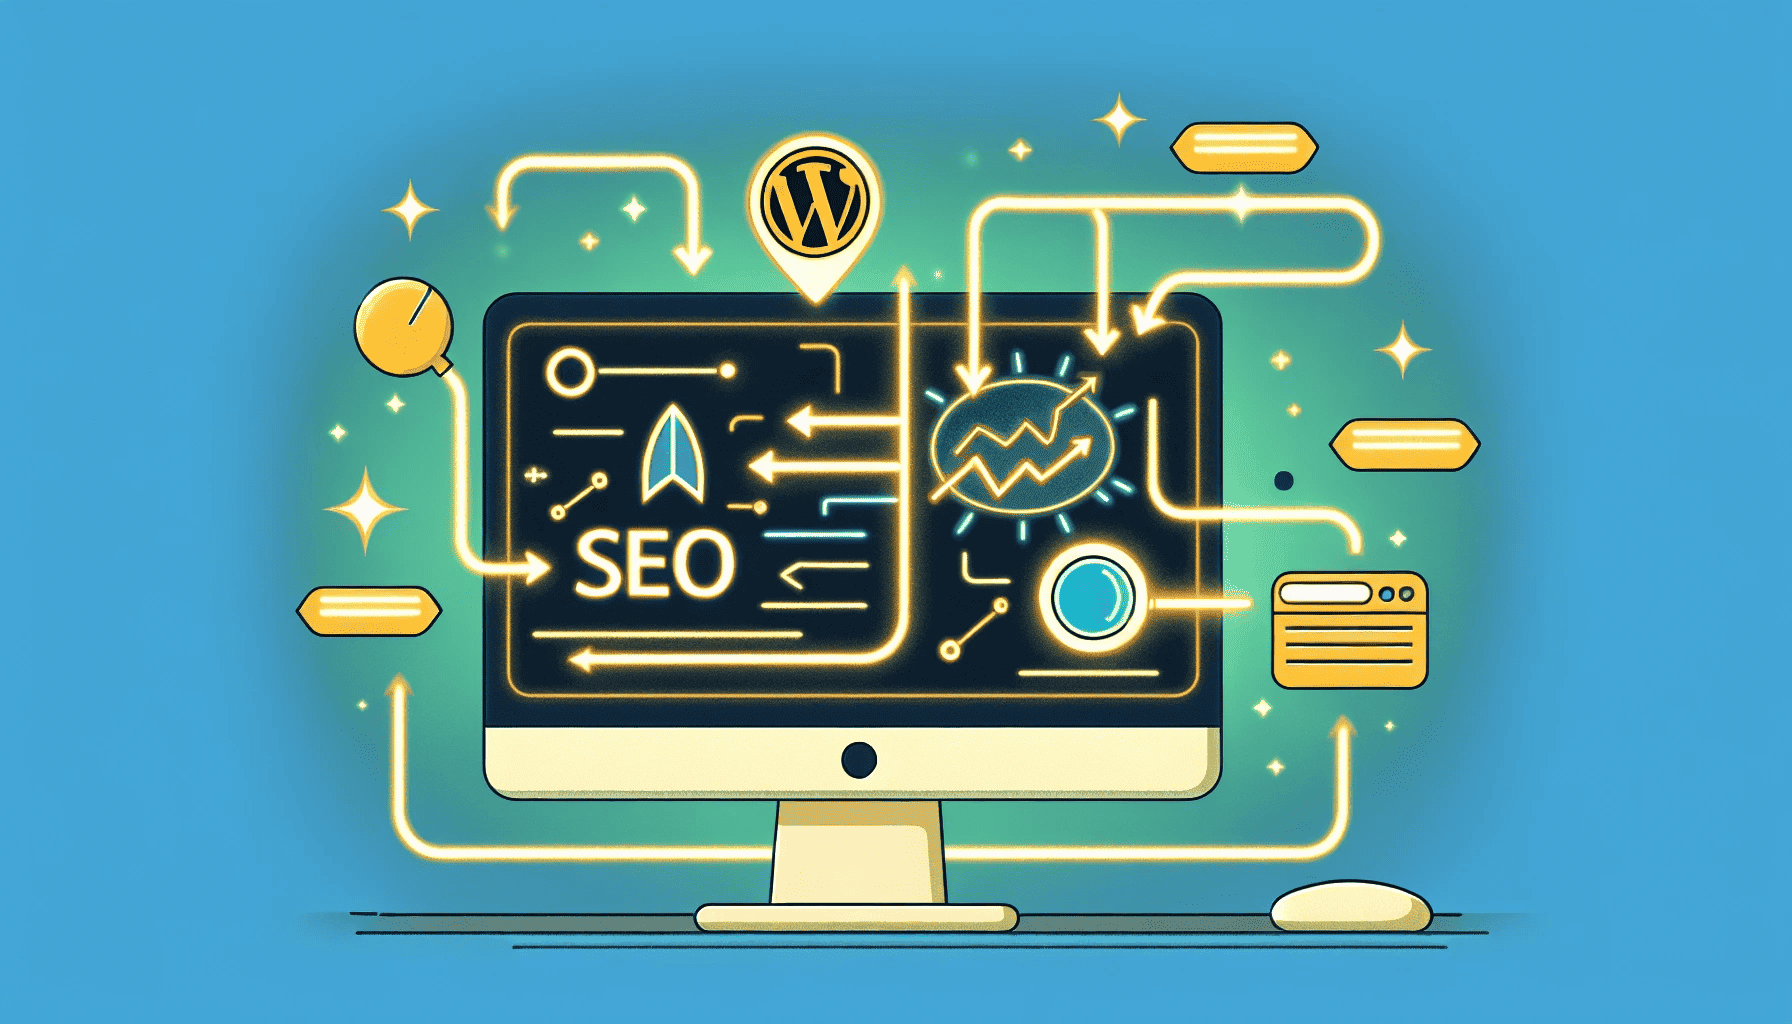 Surfer SEO integration with WordPress for seamless on-page SEO optimization